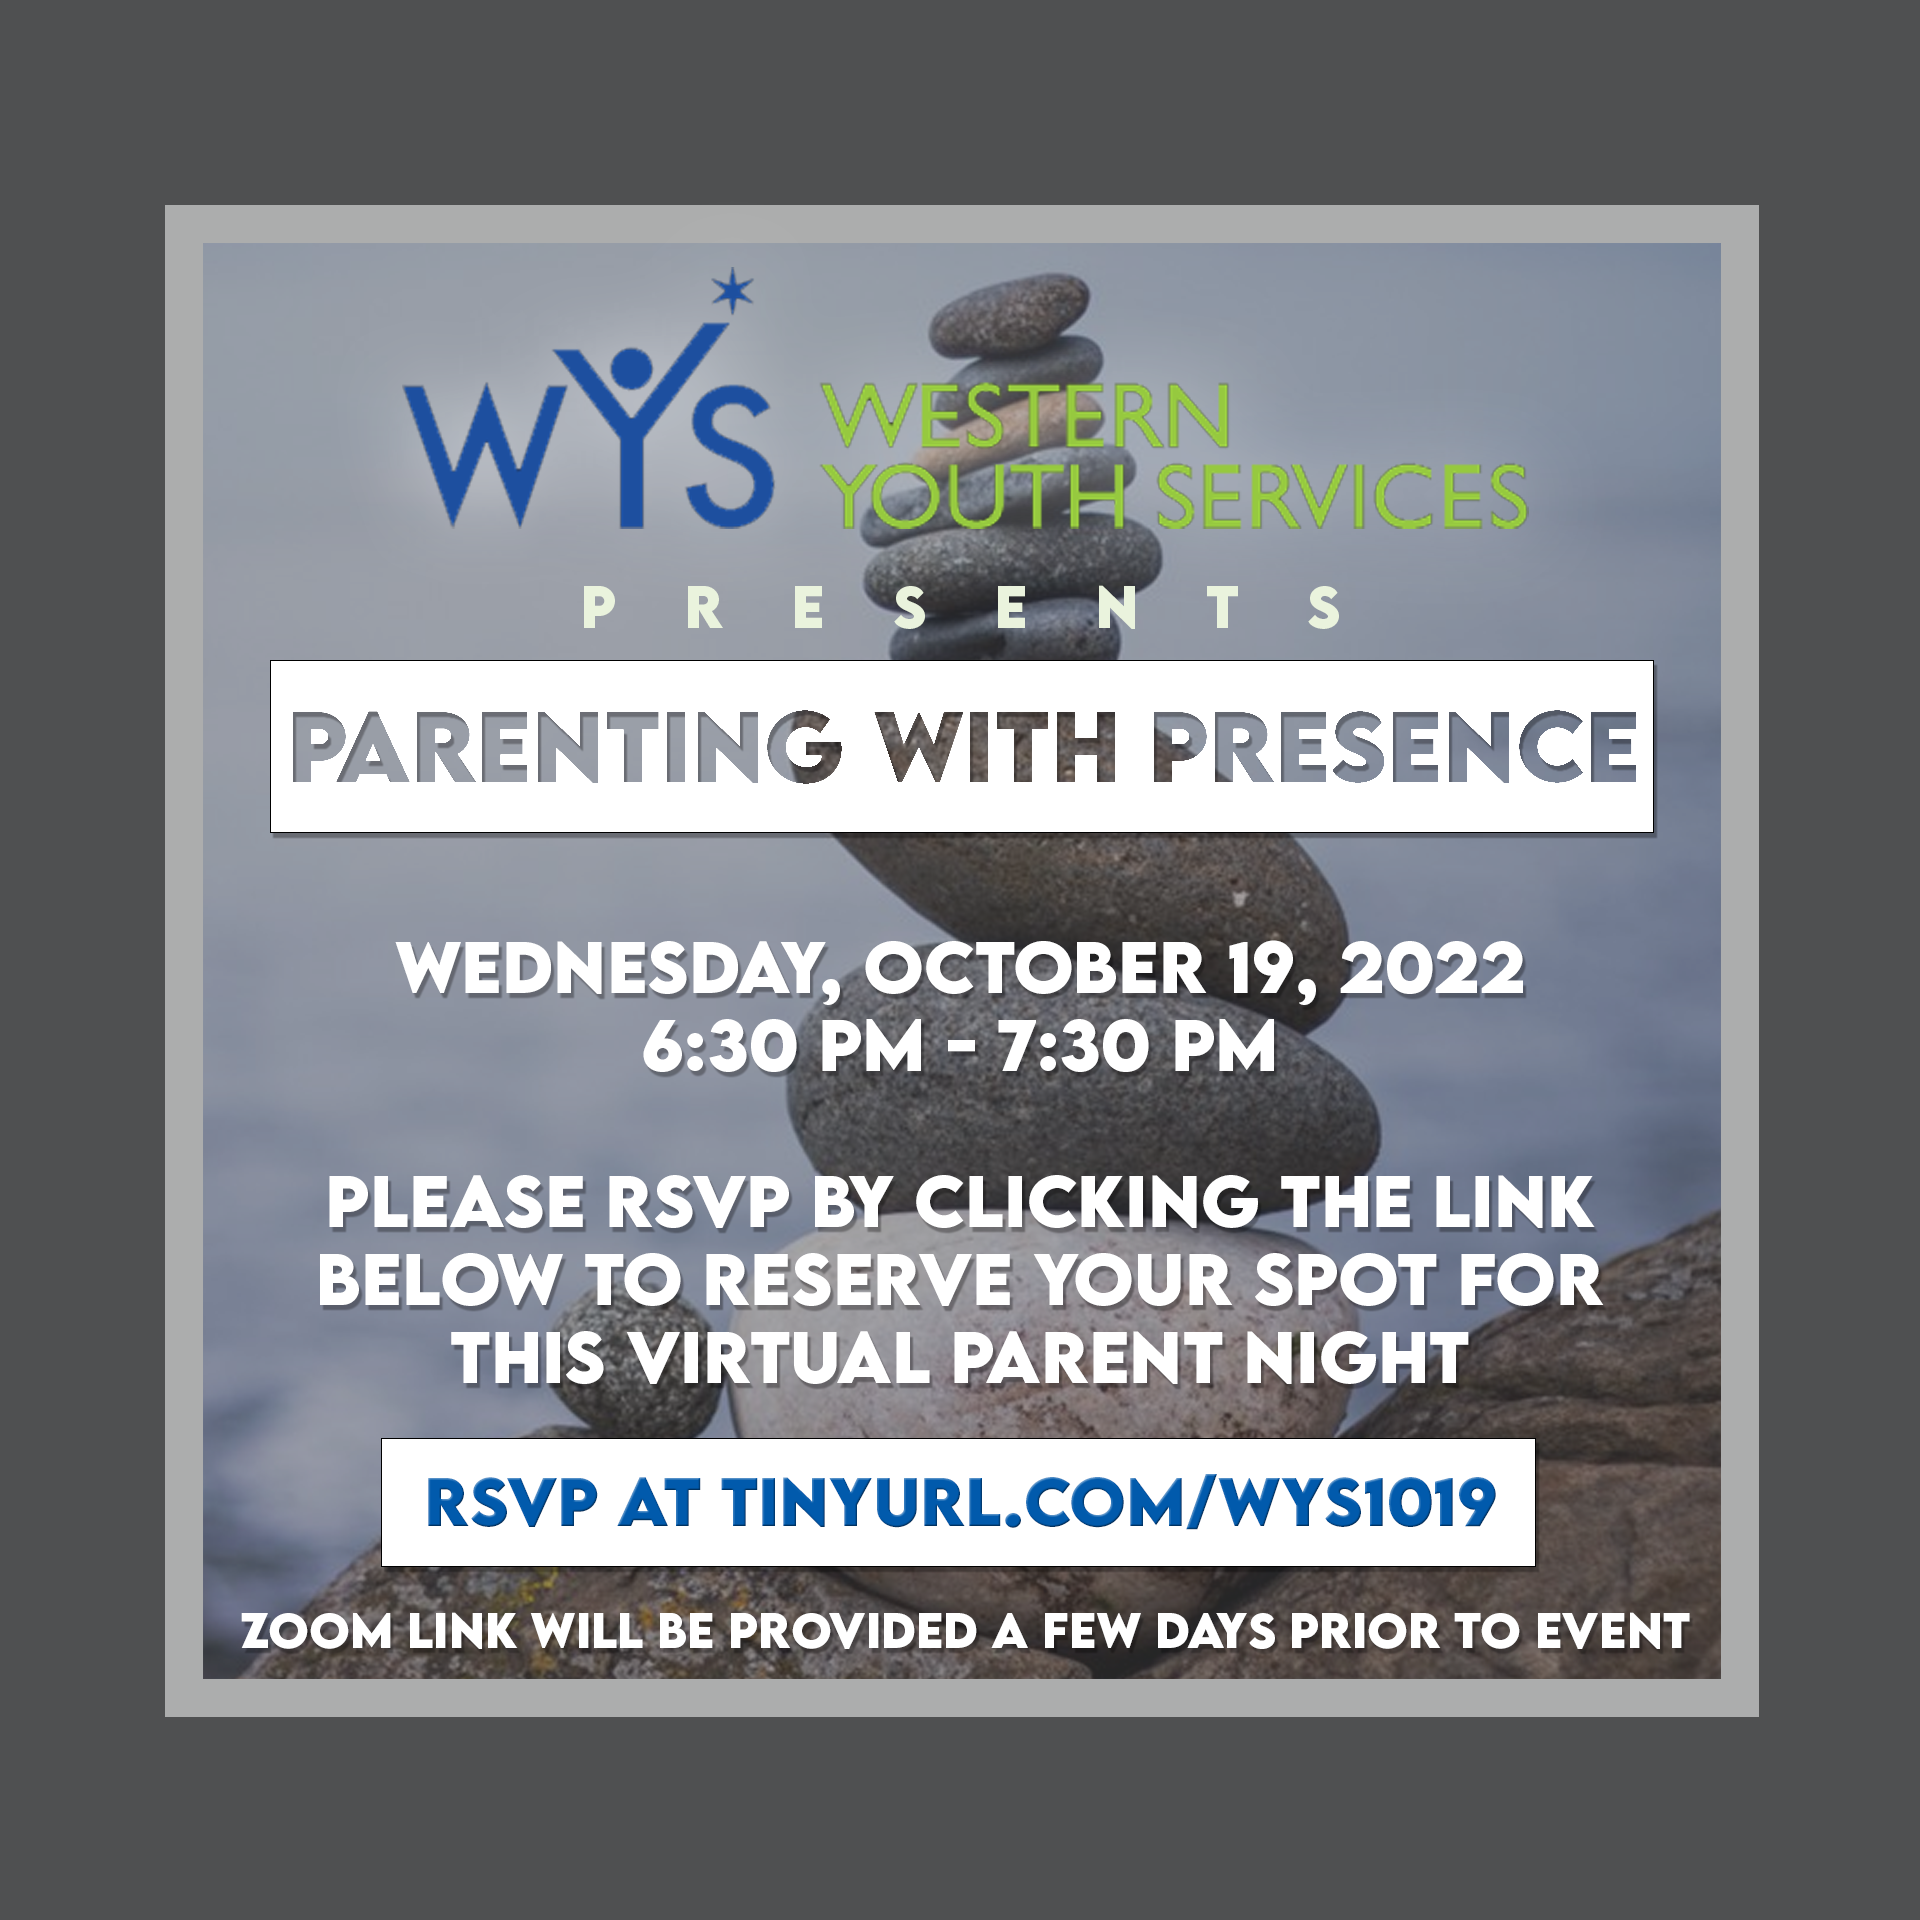 Invitation to Parenting with Presence Night presented by Western Youth Services